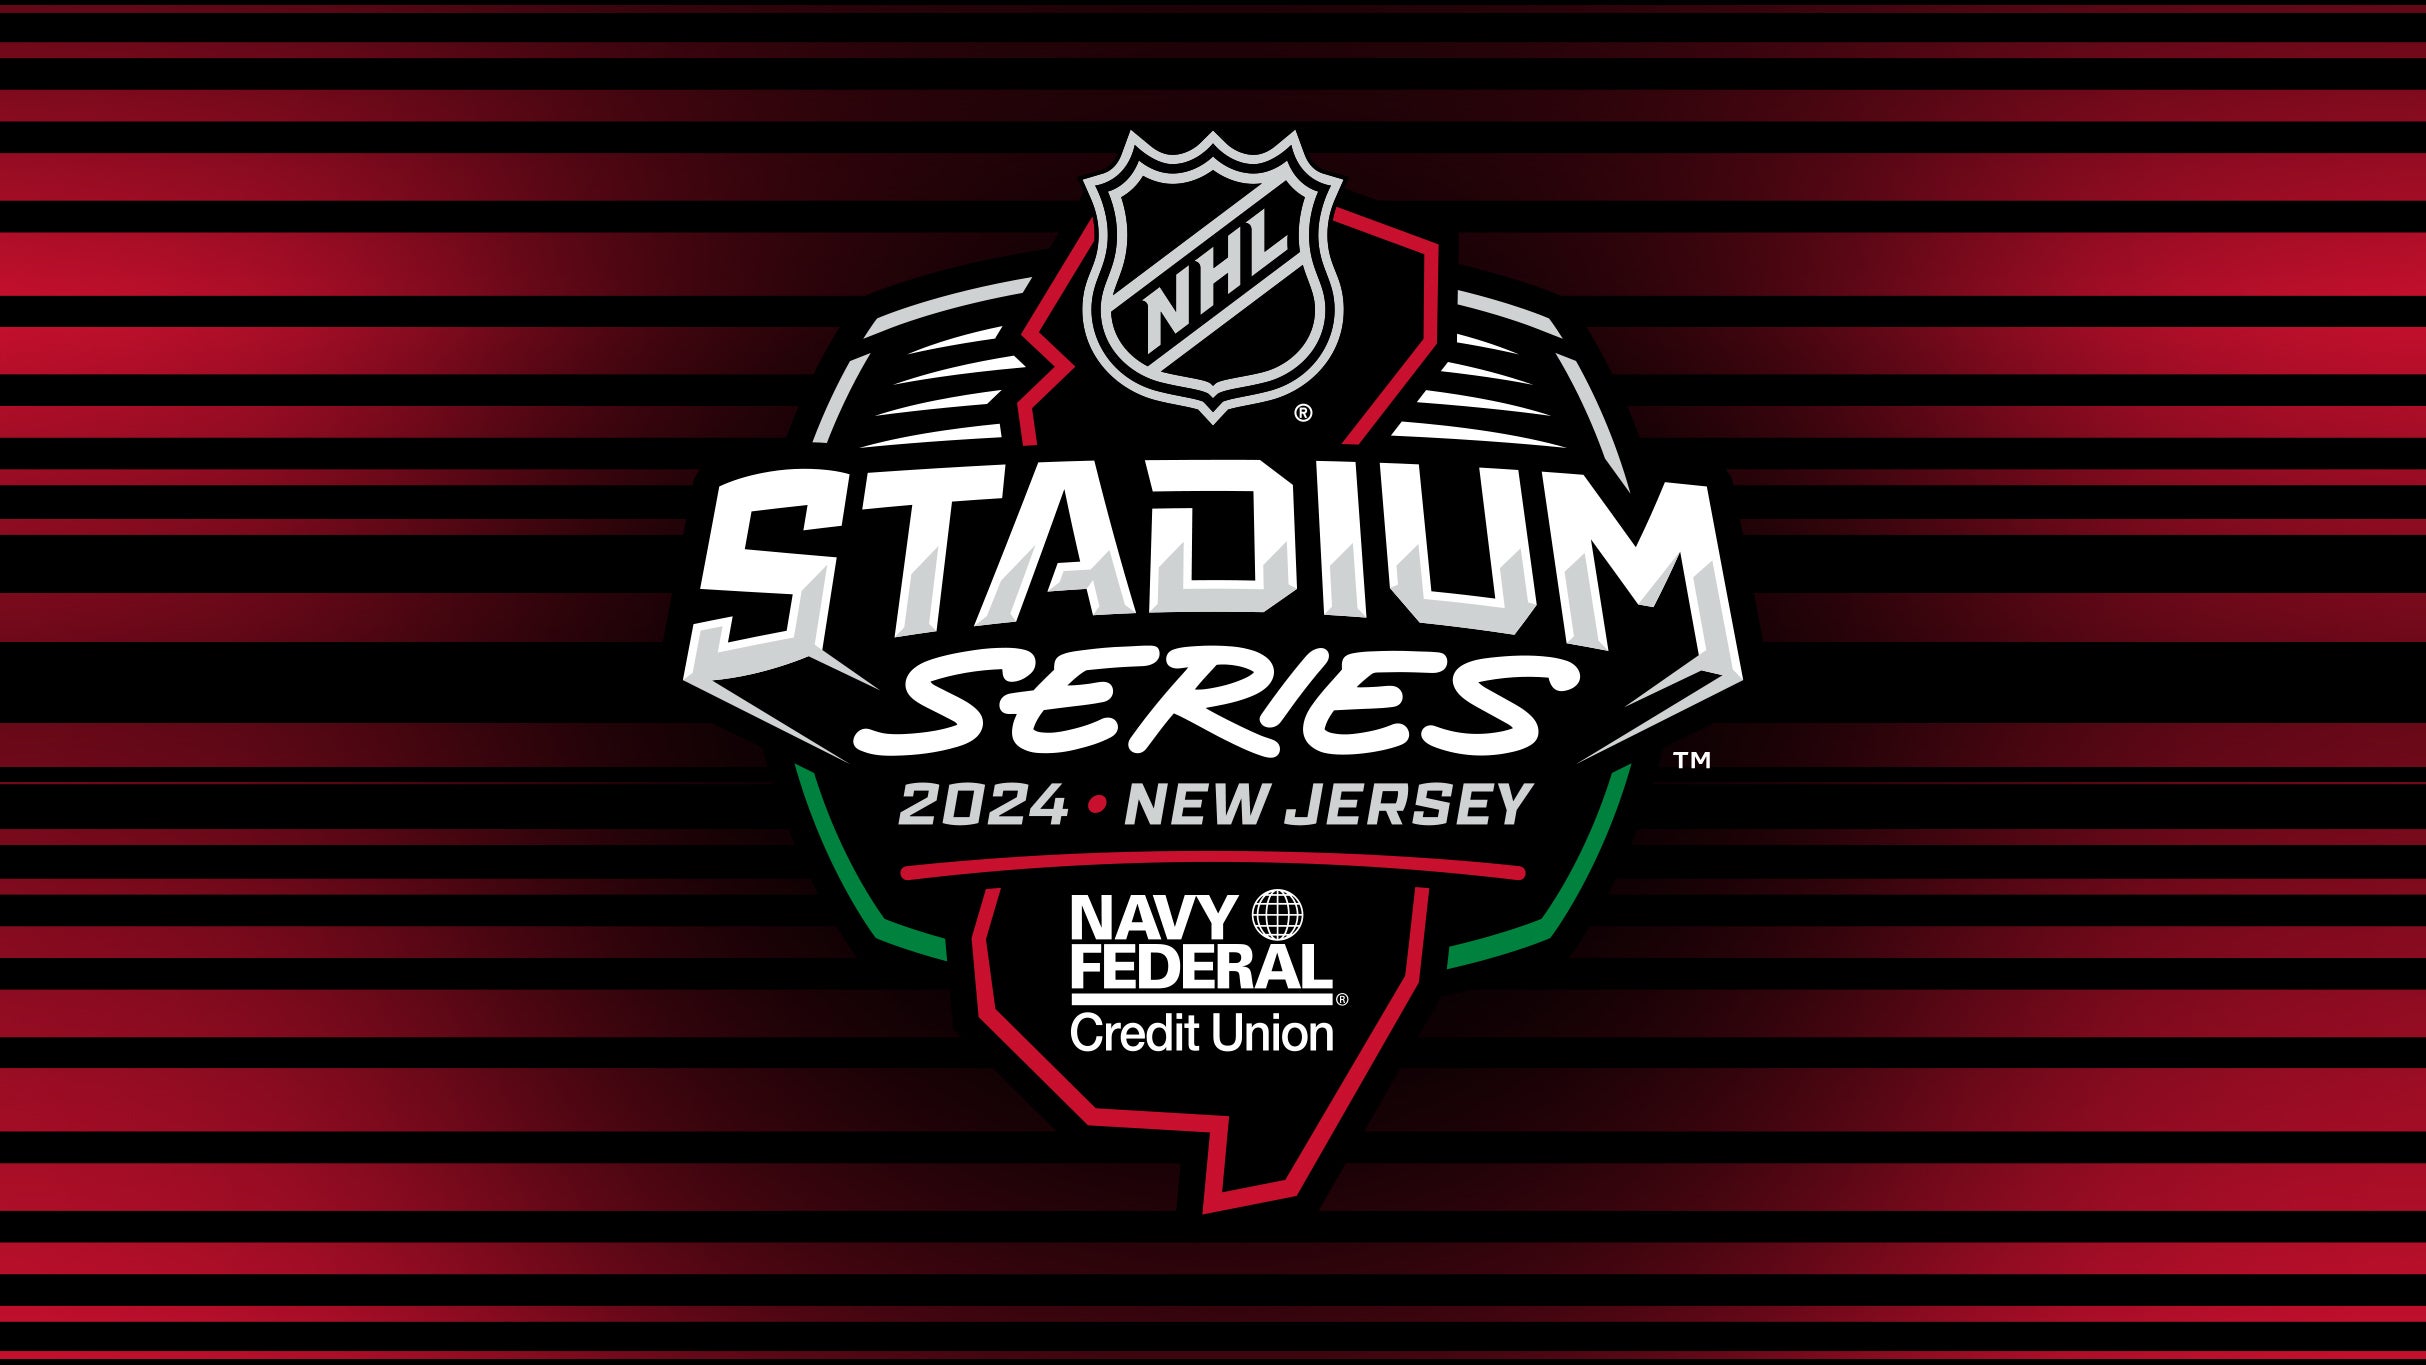 2024 Navy Federal Credit Union NHL Stadium Series- NYR v NYI in East Rutherford promo photo for NHL Stadium Series presale offer code